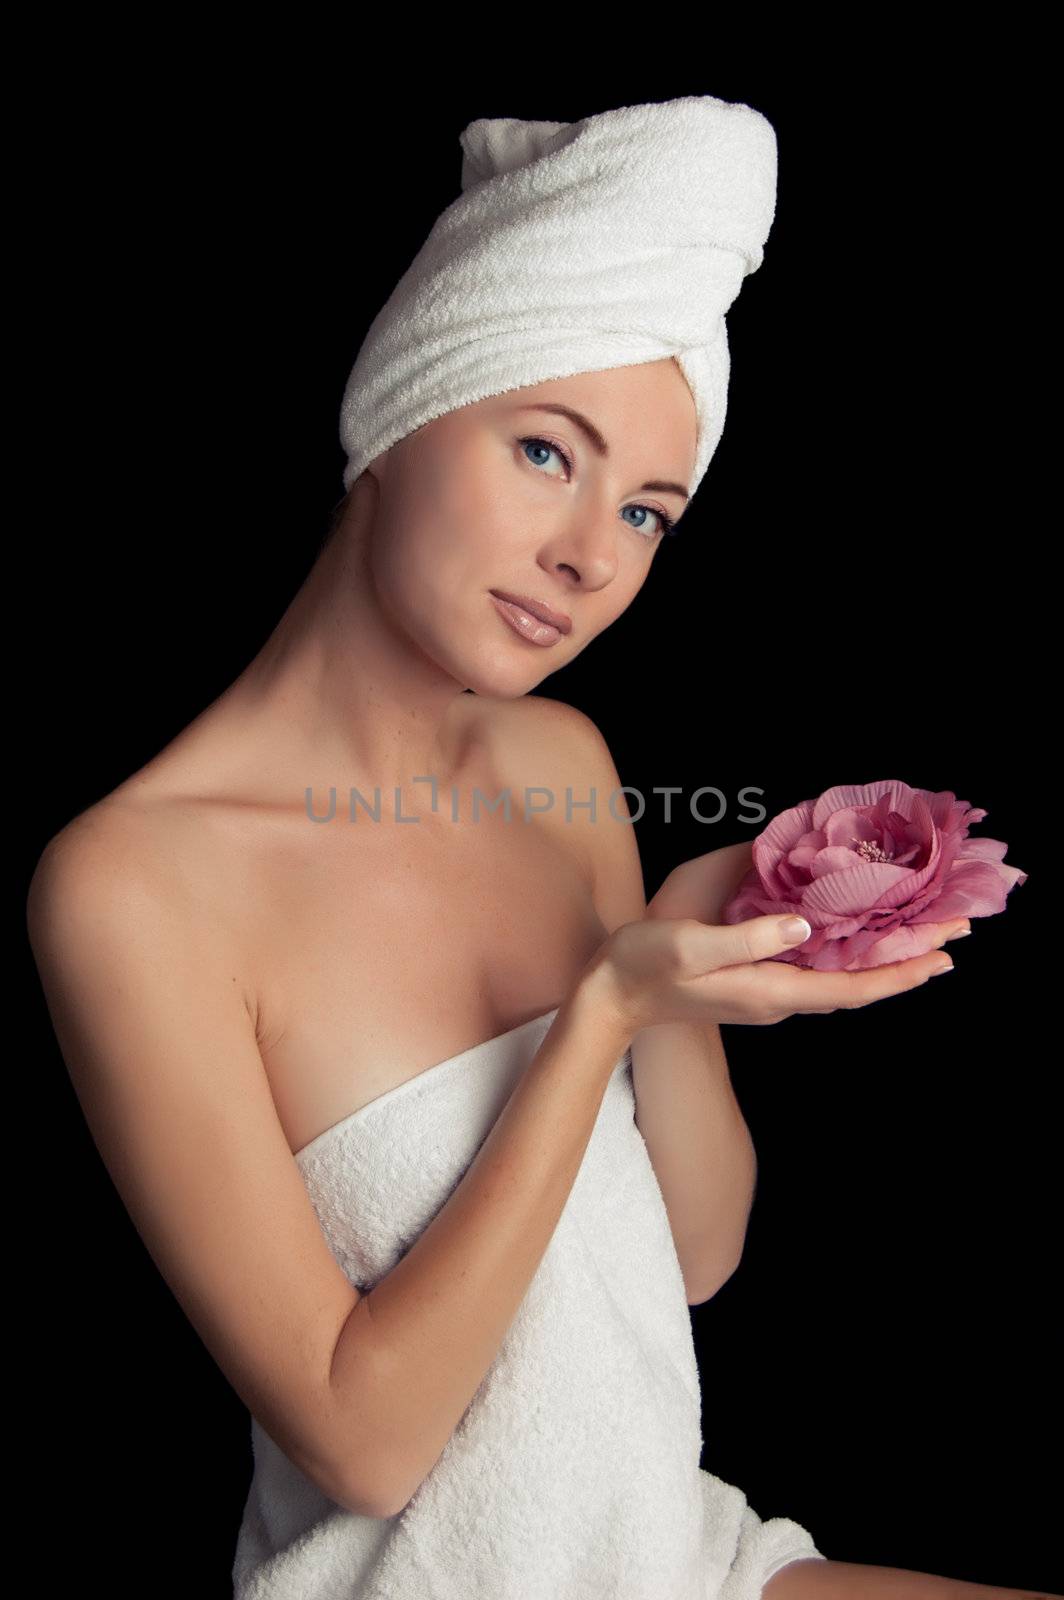 Woman after bath with towel and flower by Angel_a